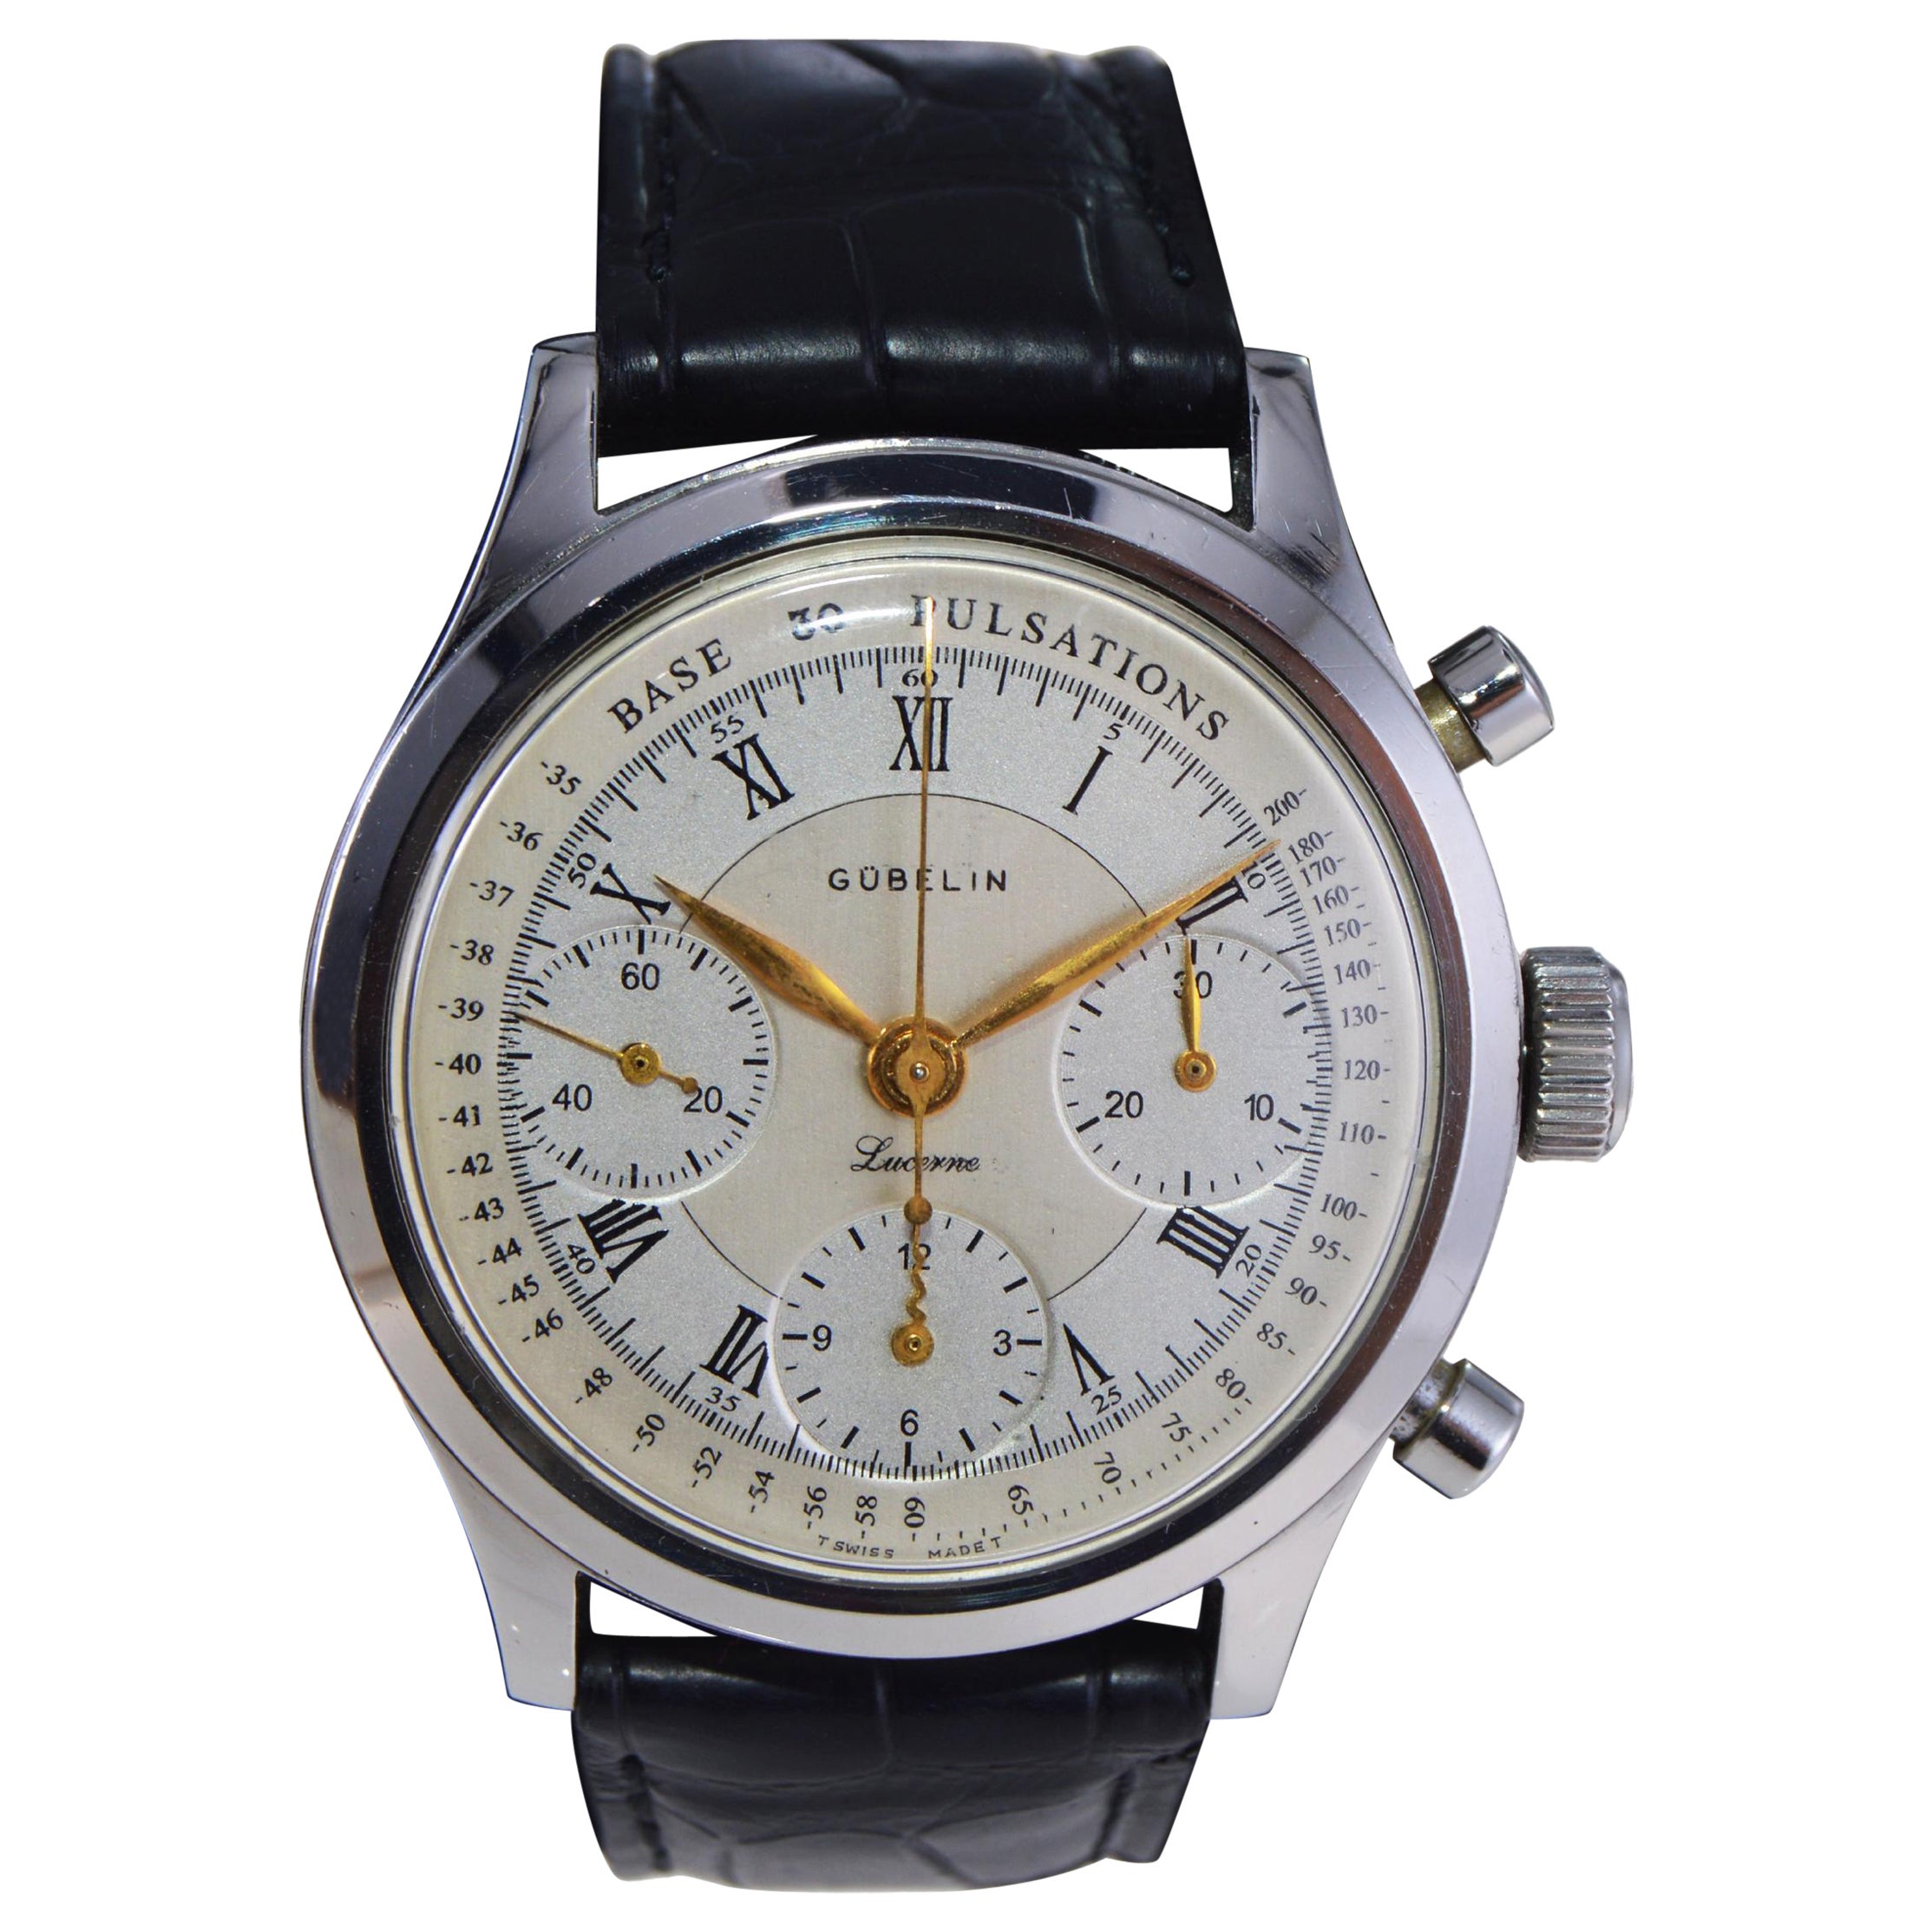 Gubelin Stainless Steel Valjoux 72 Chronograph Doctors Pulsation Watch, 1940s